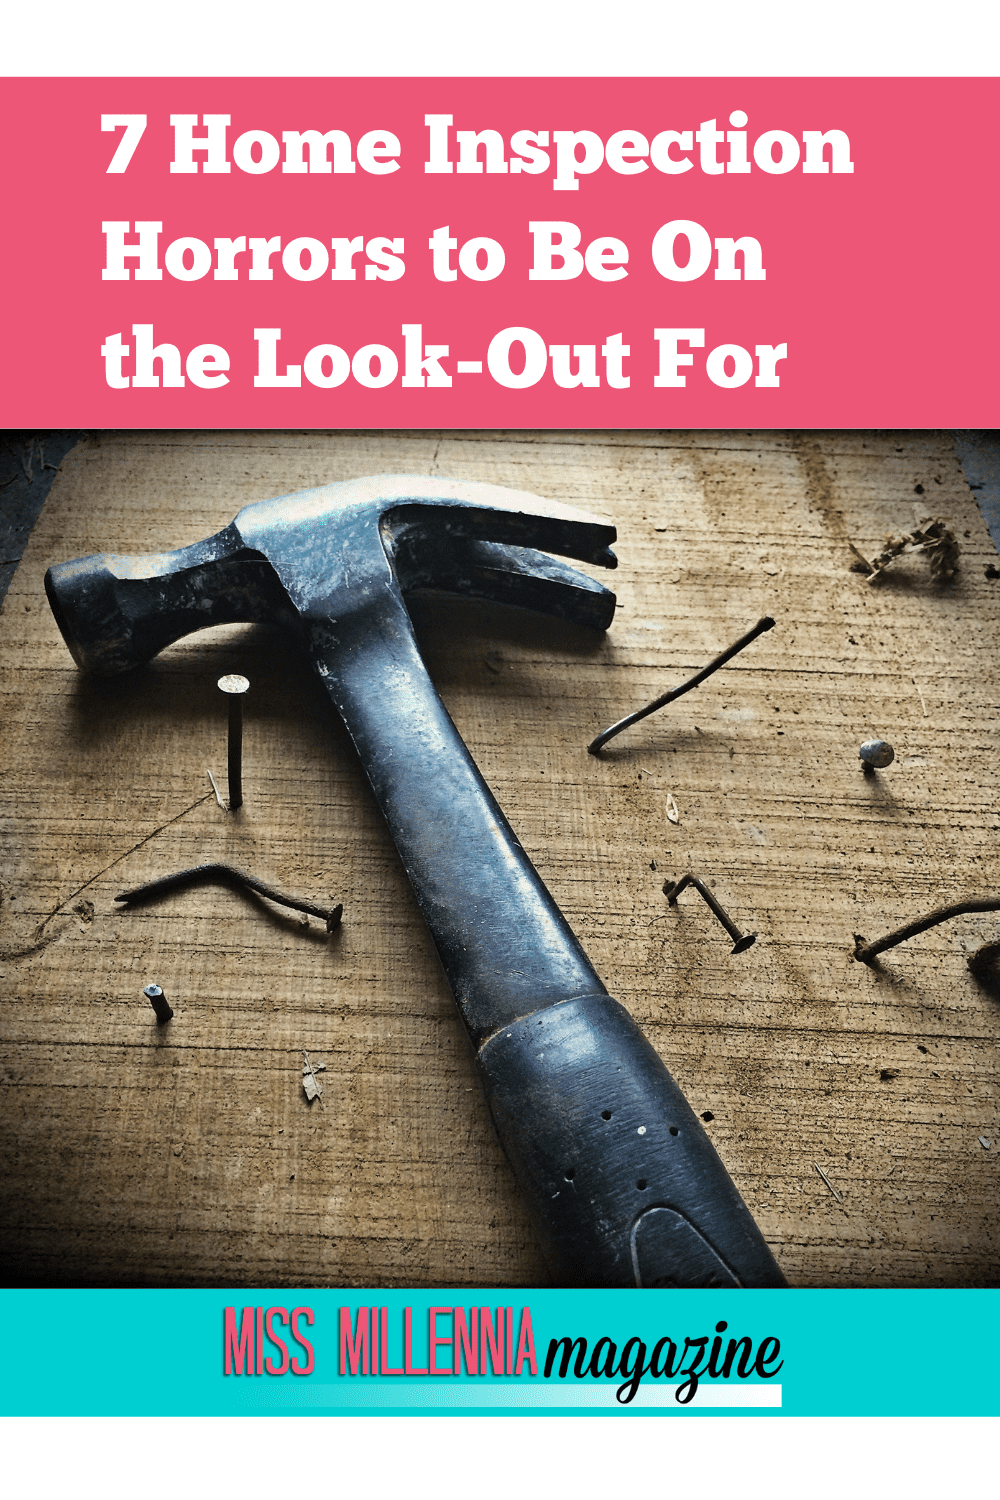 7 Home Inspection Horrors to Be On the Look-Out For